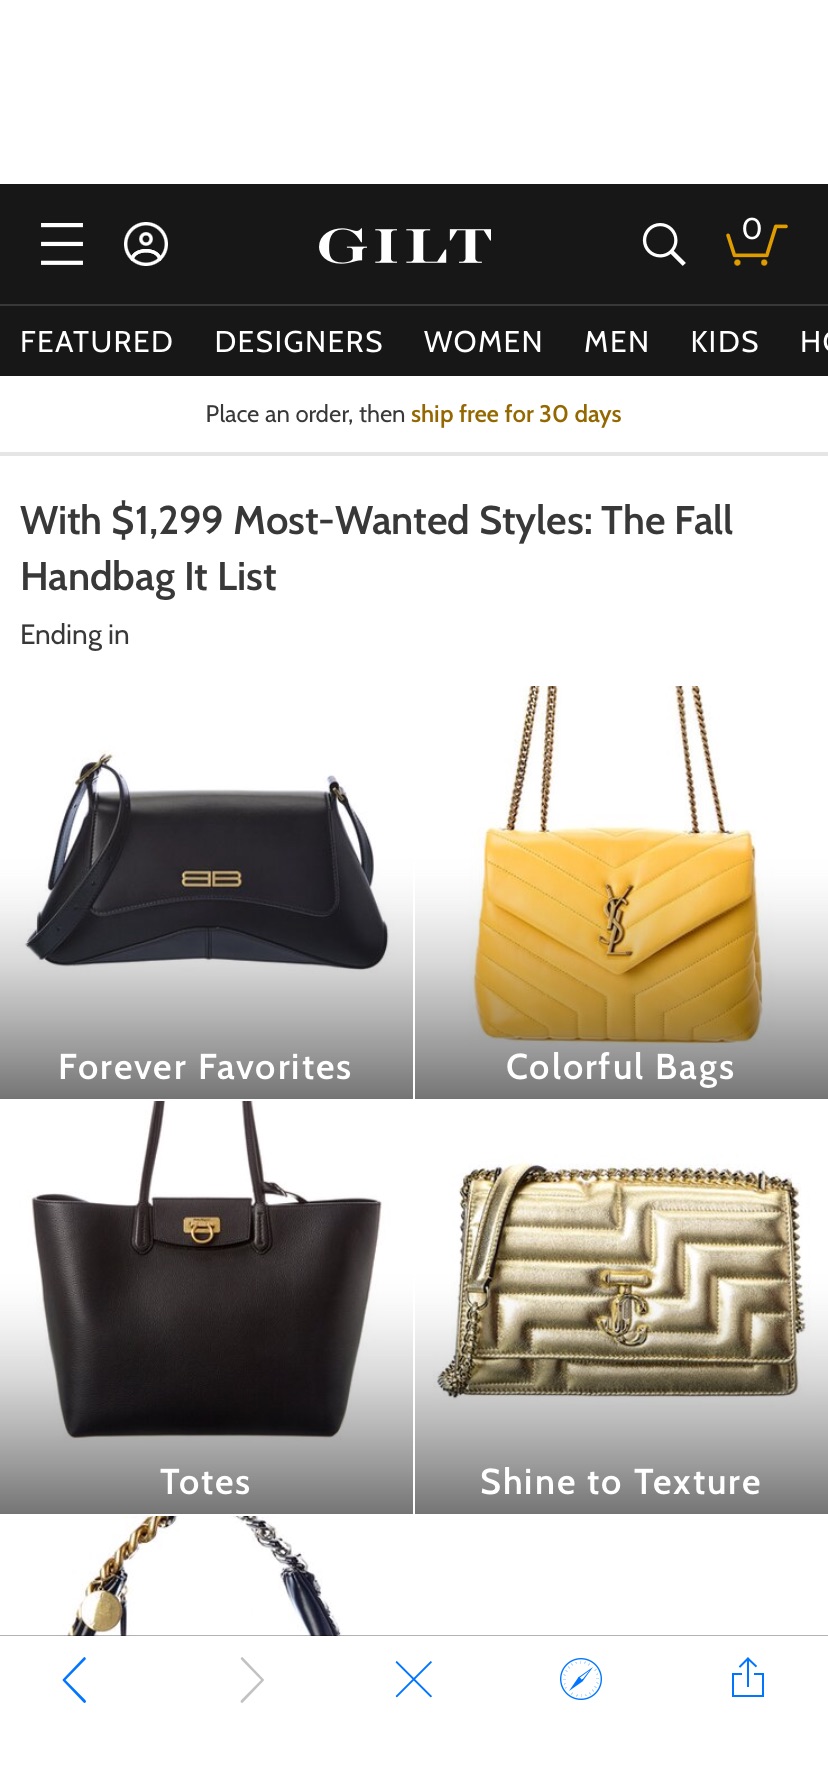 With $1,299 Most-Wanted Styles: The Fall Handbag It List / Gilt